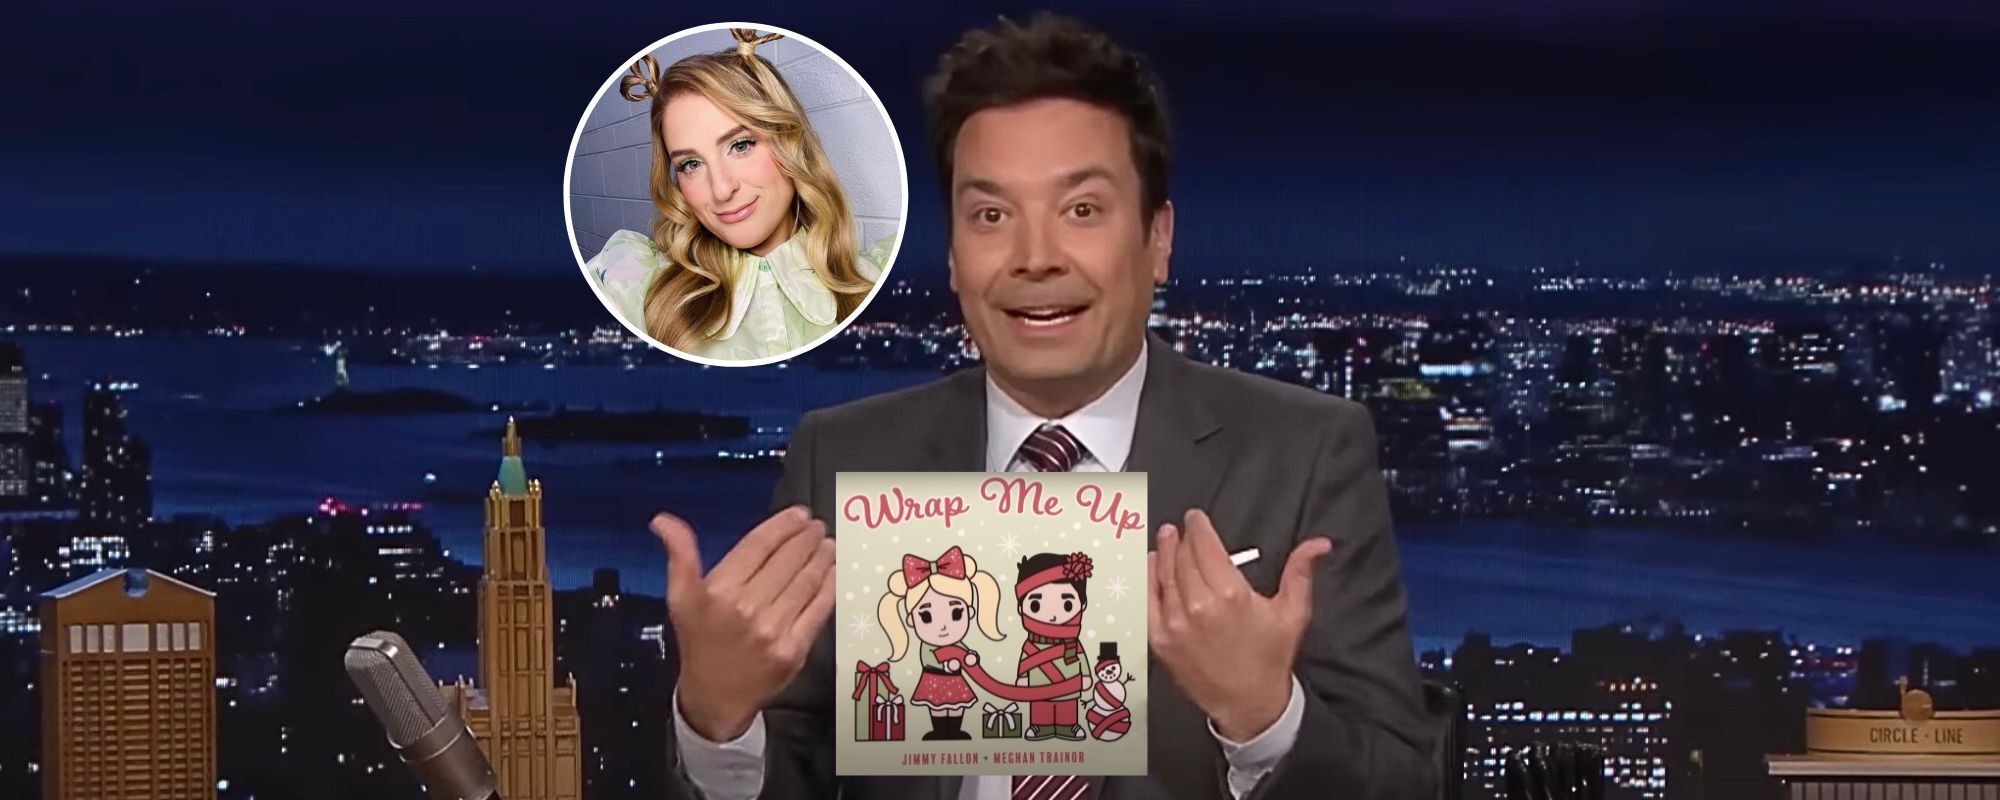 Jimmy Fallon and Meghan Trainor Just Released a Holiday Themed Song, “Wrap Me Up”